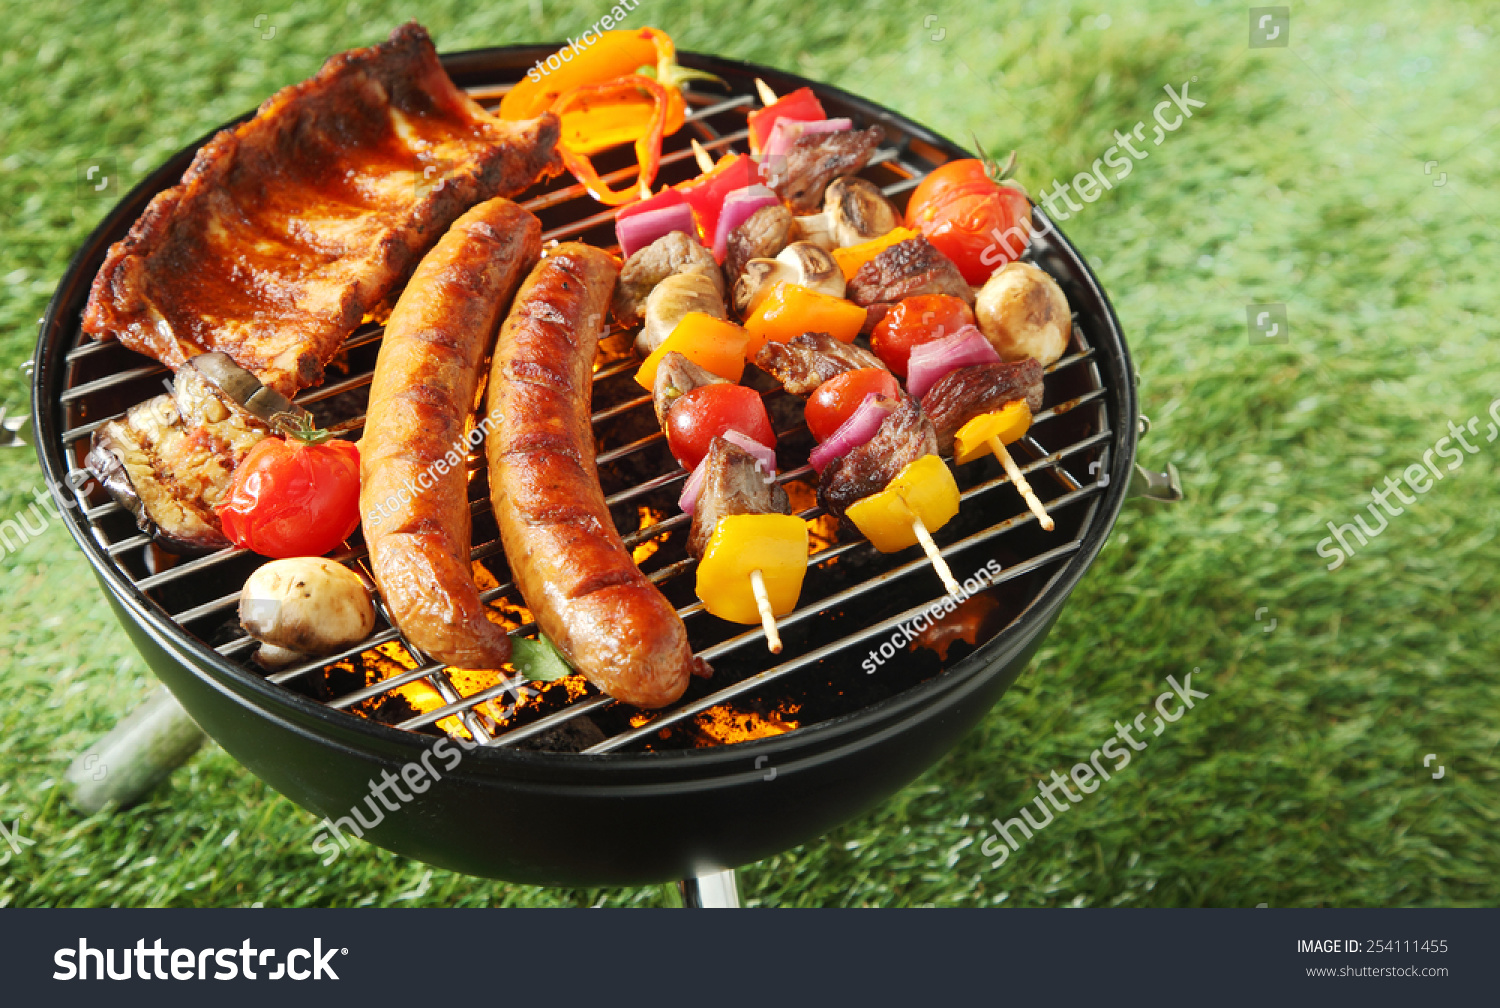 Selection Of Meat Grilling Over The Coals On A Portable Barbecue With ...